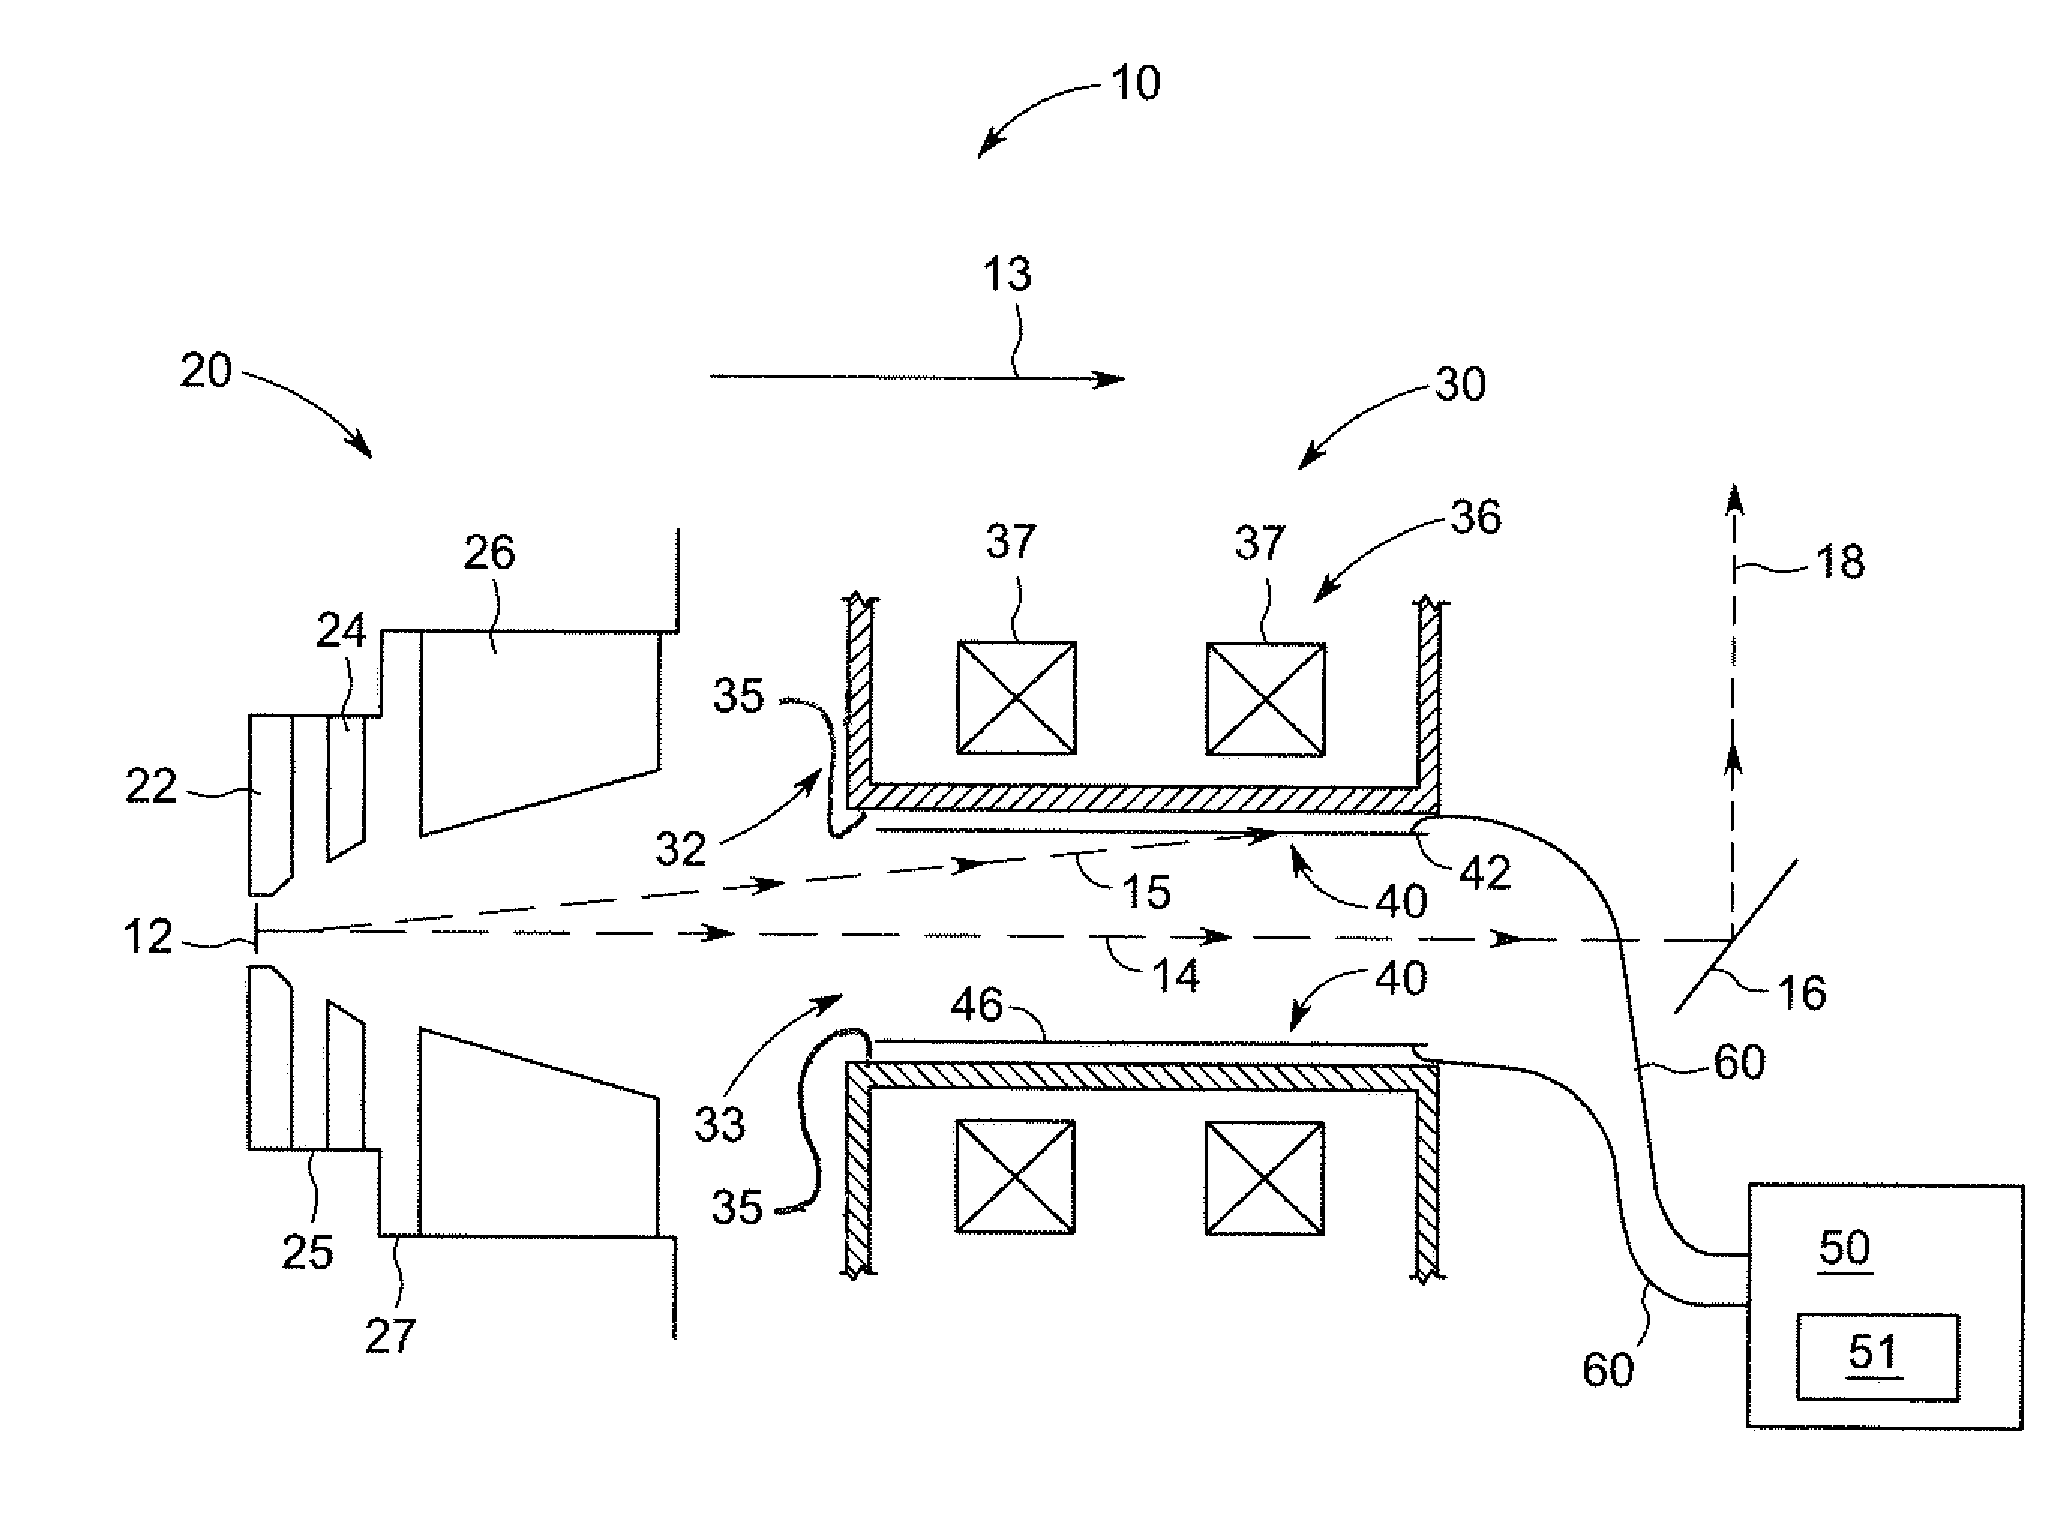 Systems and methods for monitoring and controlling an electron beam